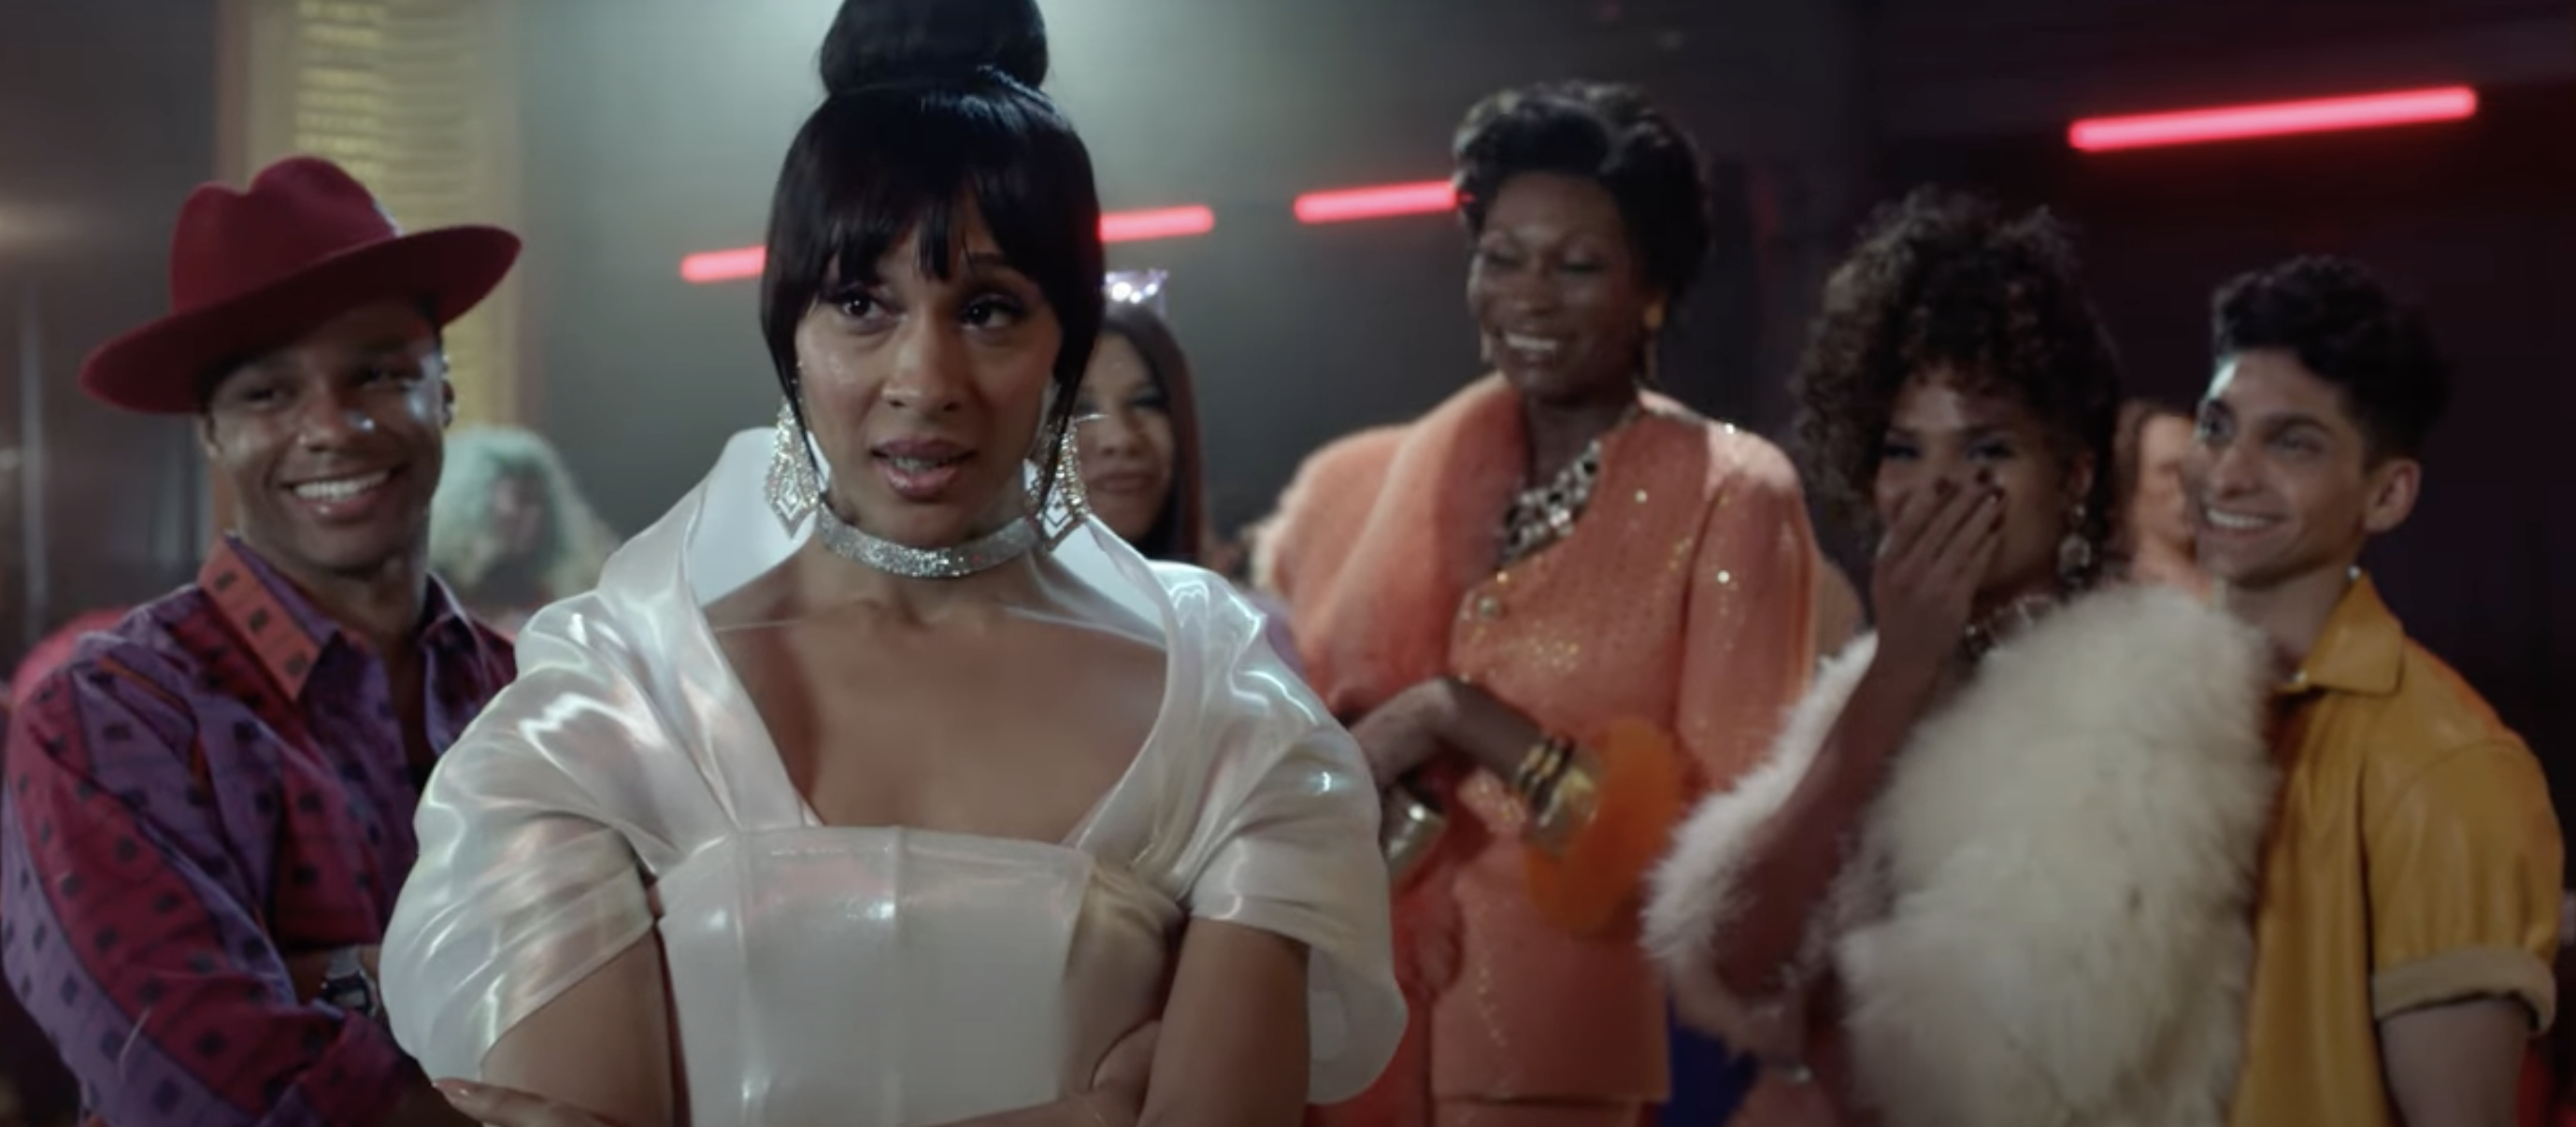 mj rodriguez from pose